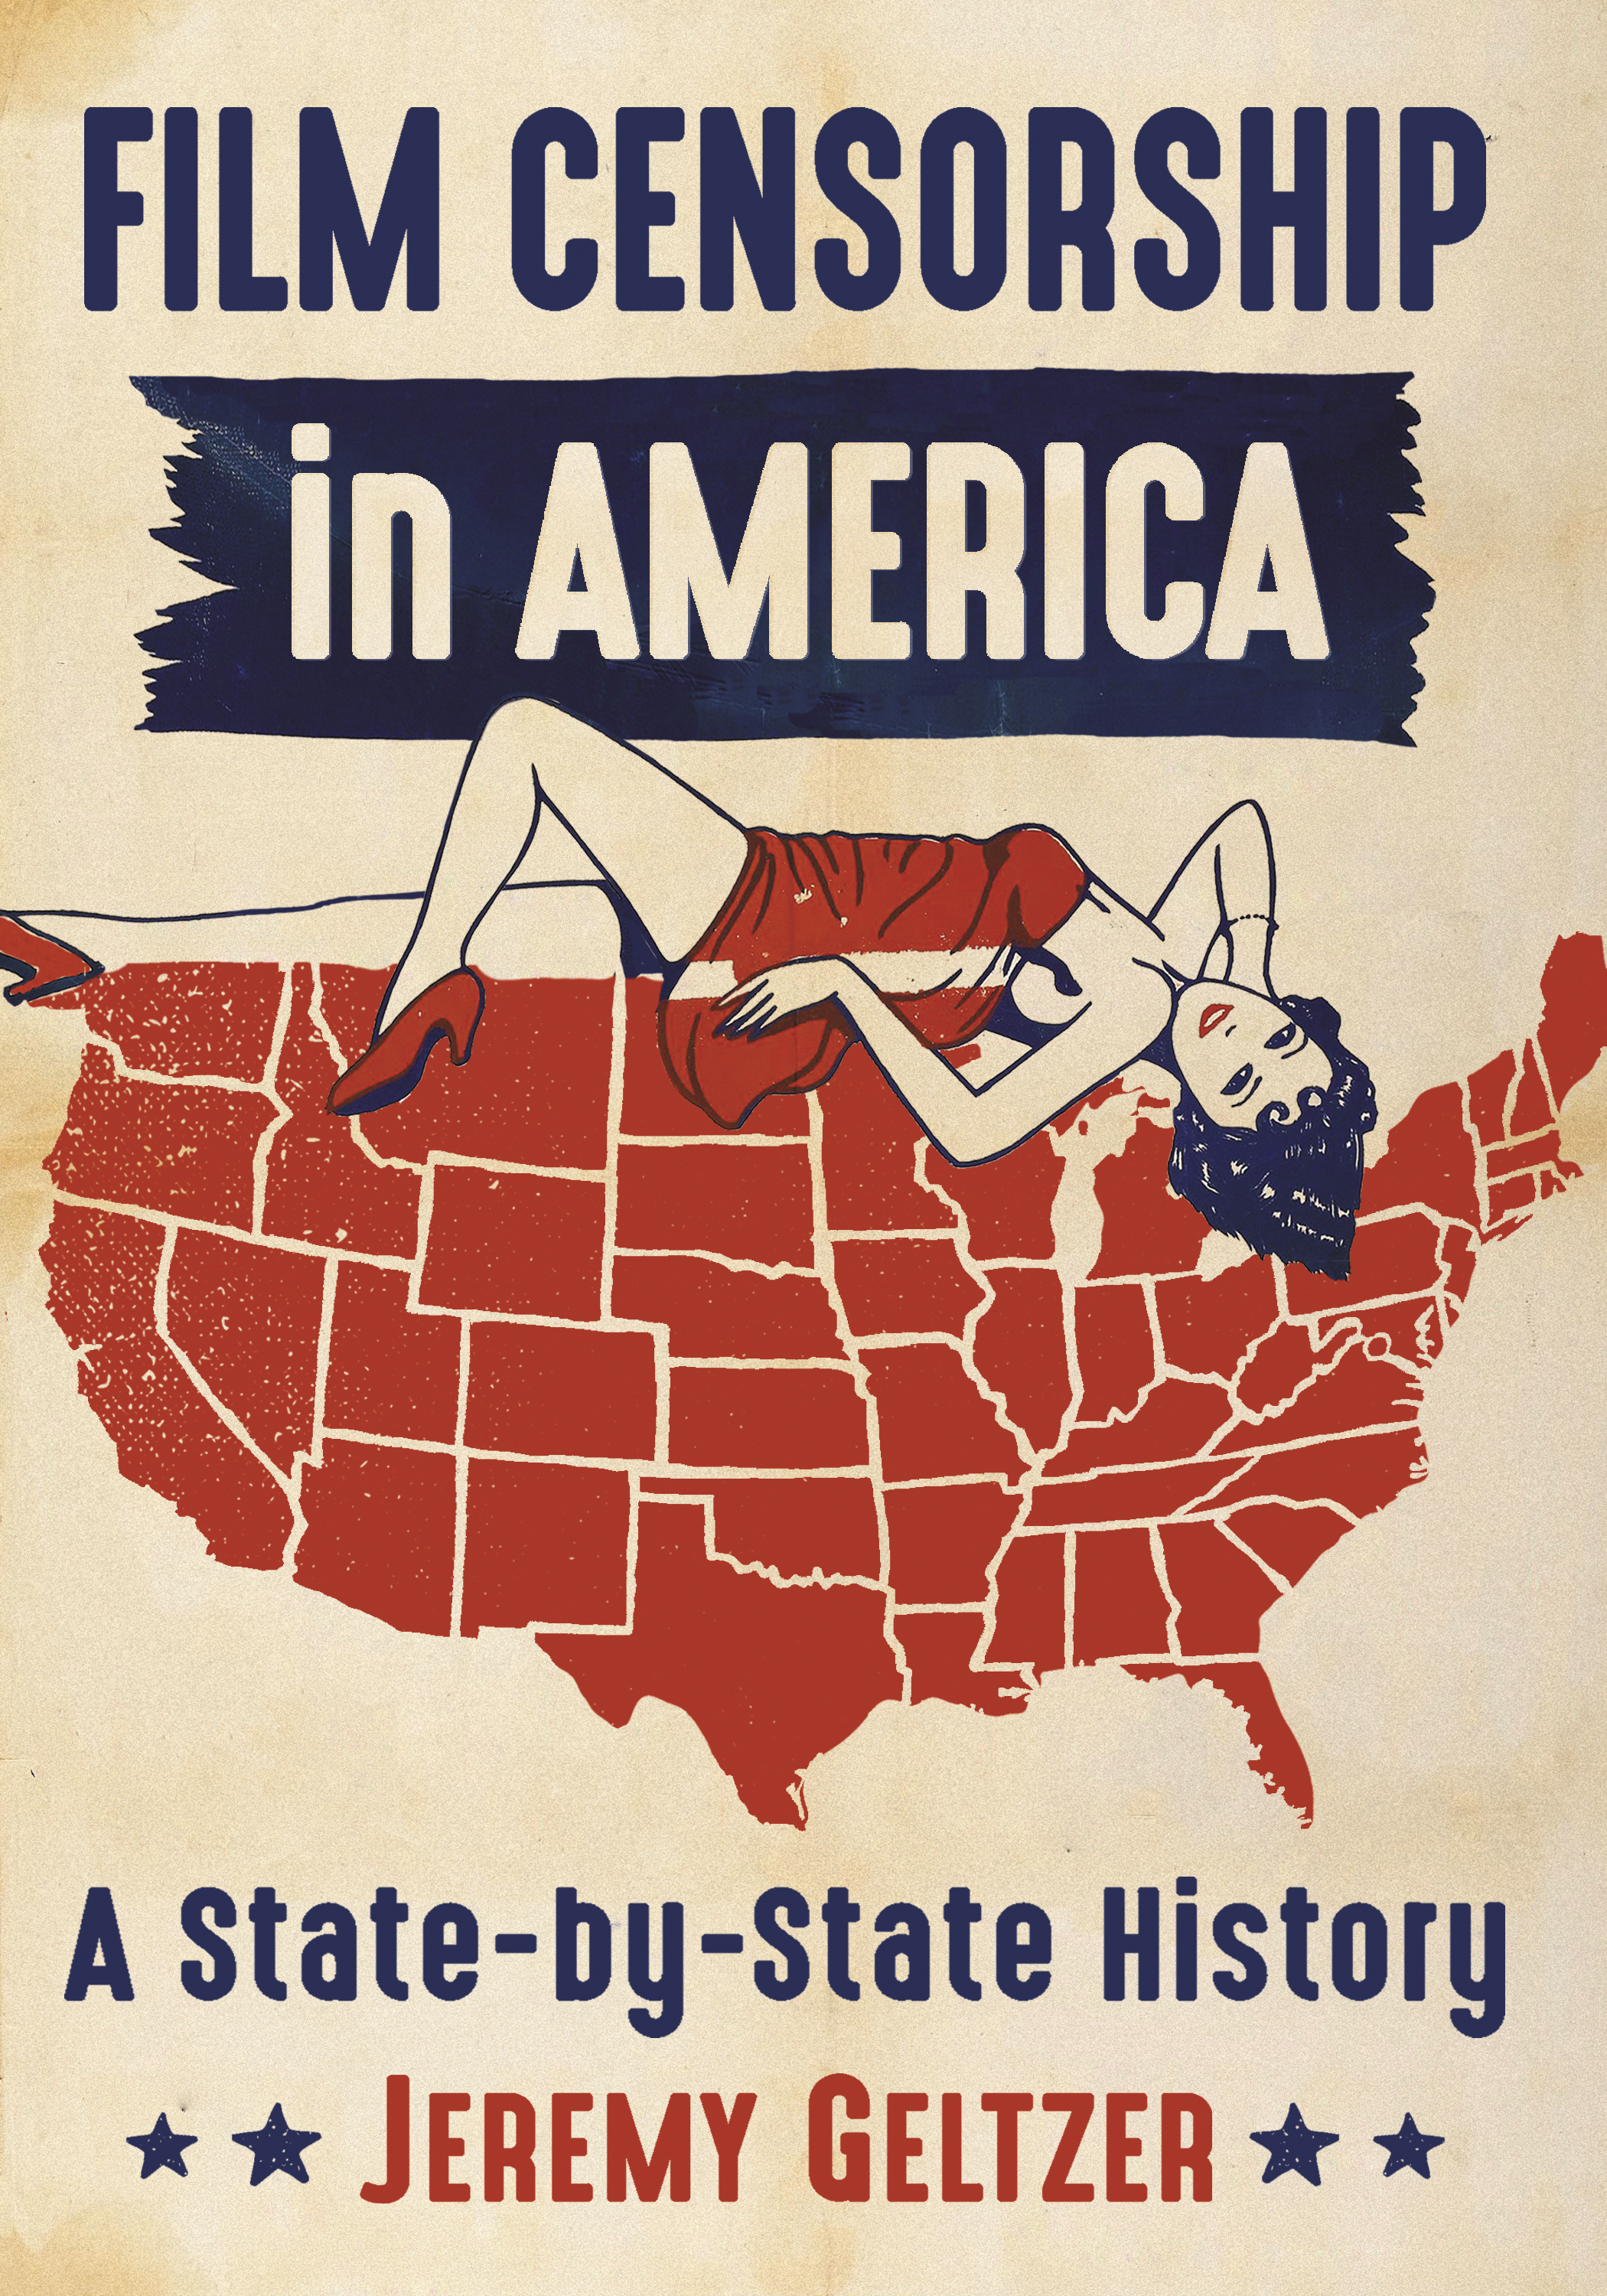 Film censorship in America a state-by-state history - image 1